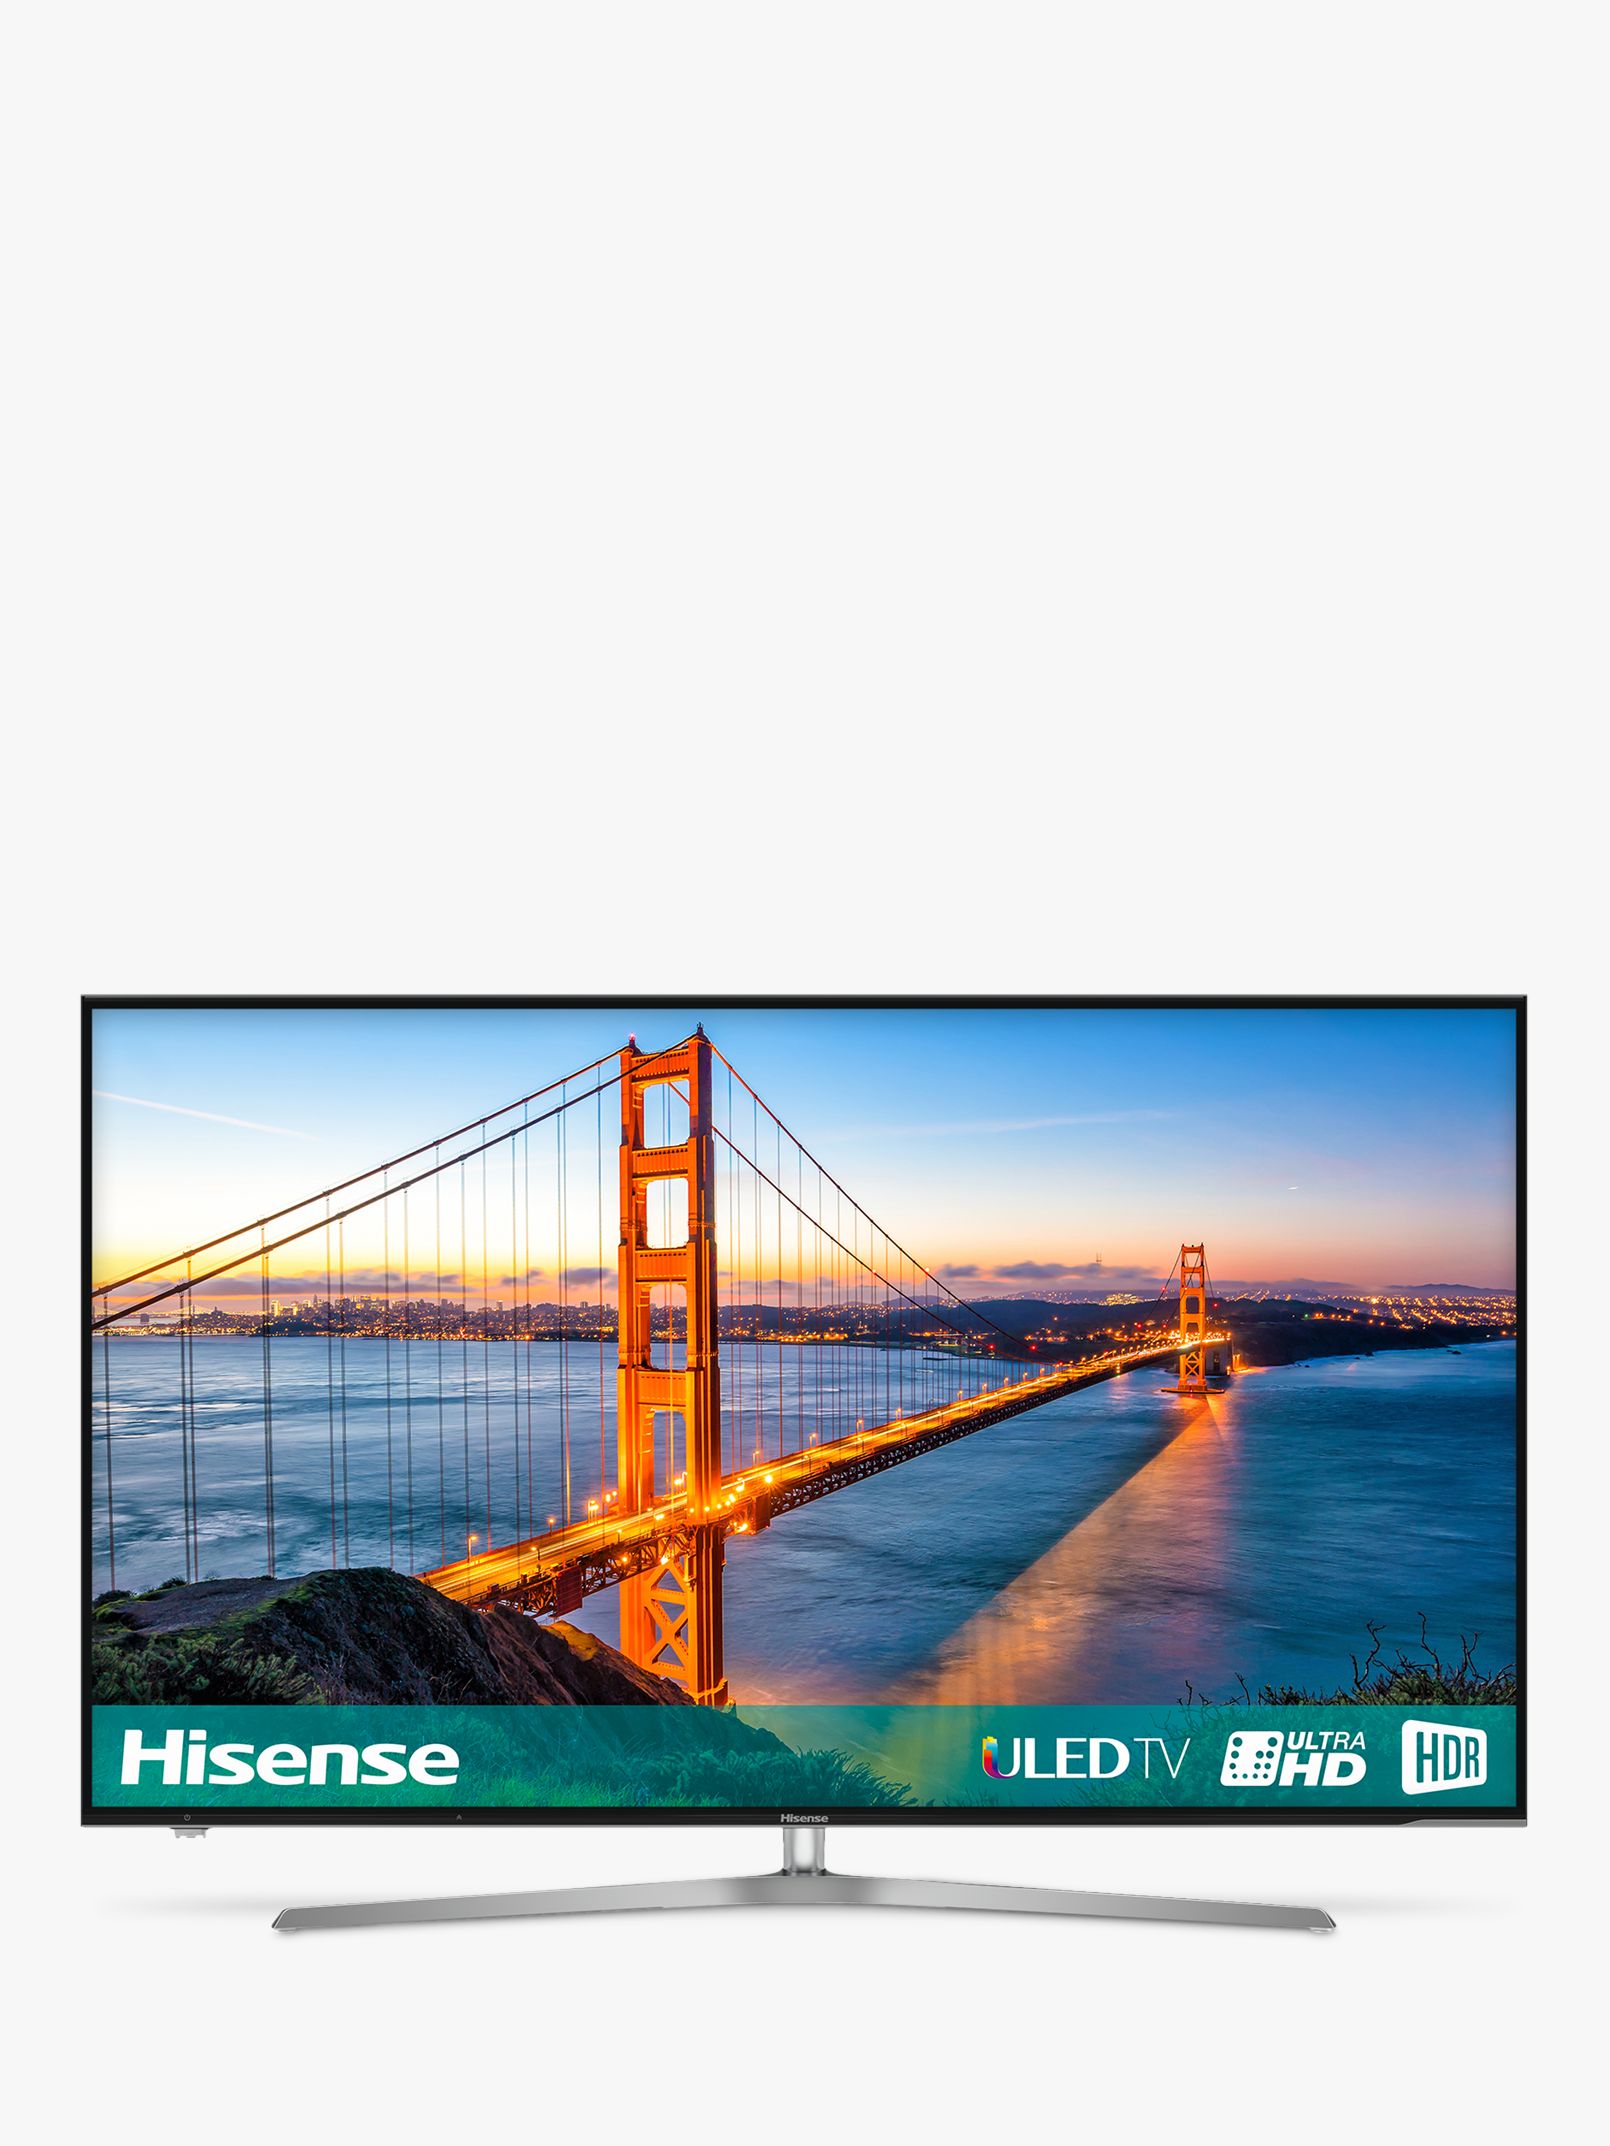 Hisense 50U7A ULED HDR 4K Ultra HD Smart TV, 50 with Freeview Play, Ultra HD Certified, Black/Silver